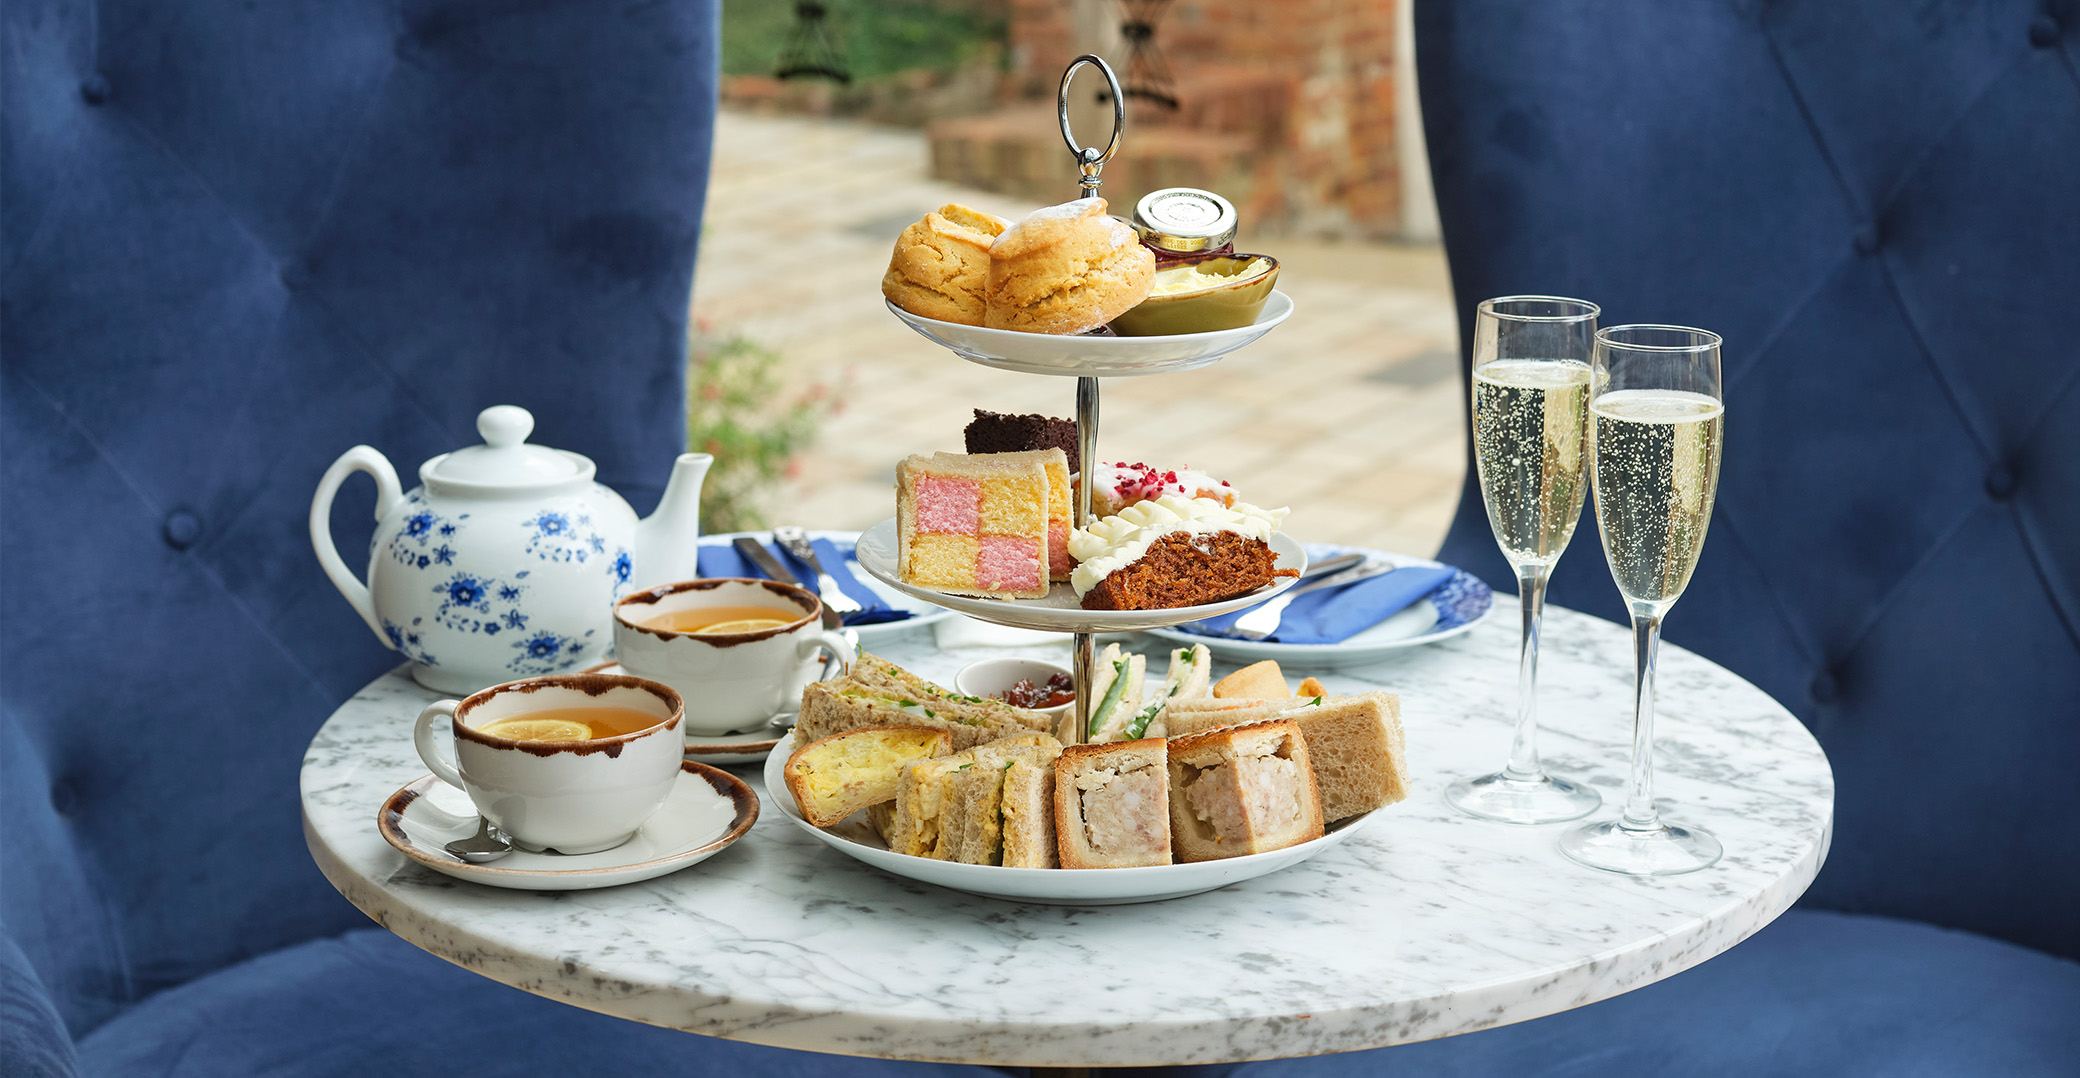 Afternoon Tea Is Back At The Coach House Kitchen - Hatfield House